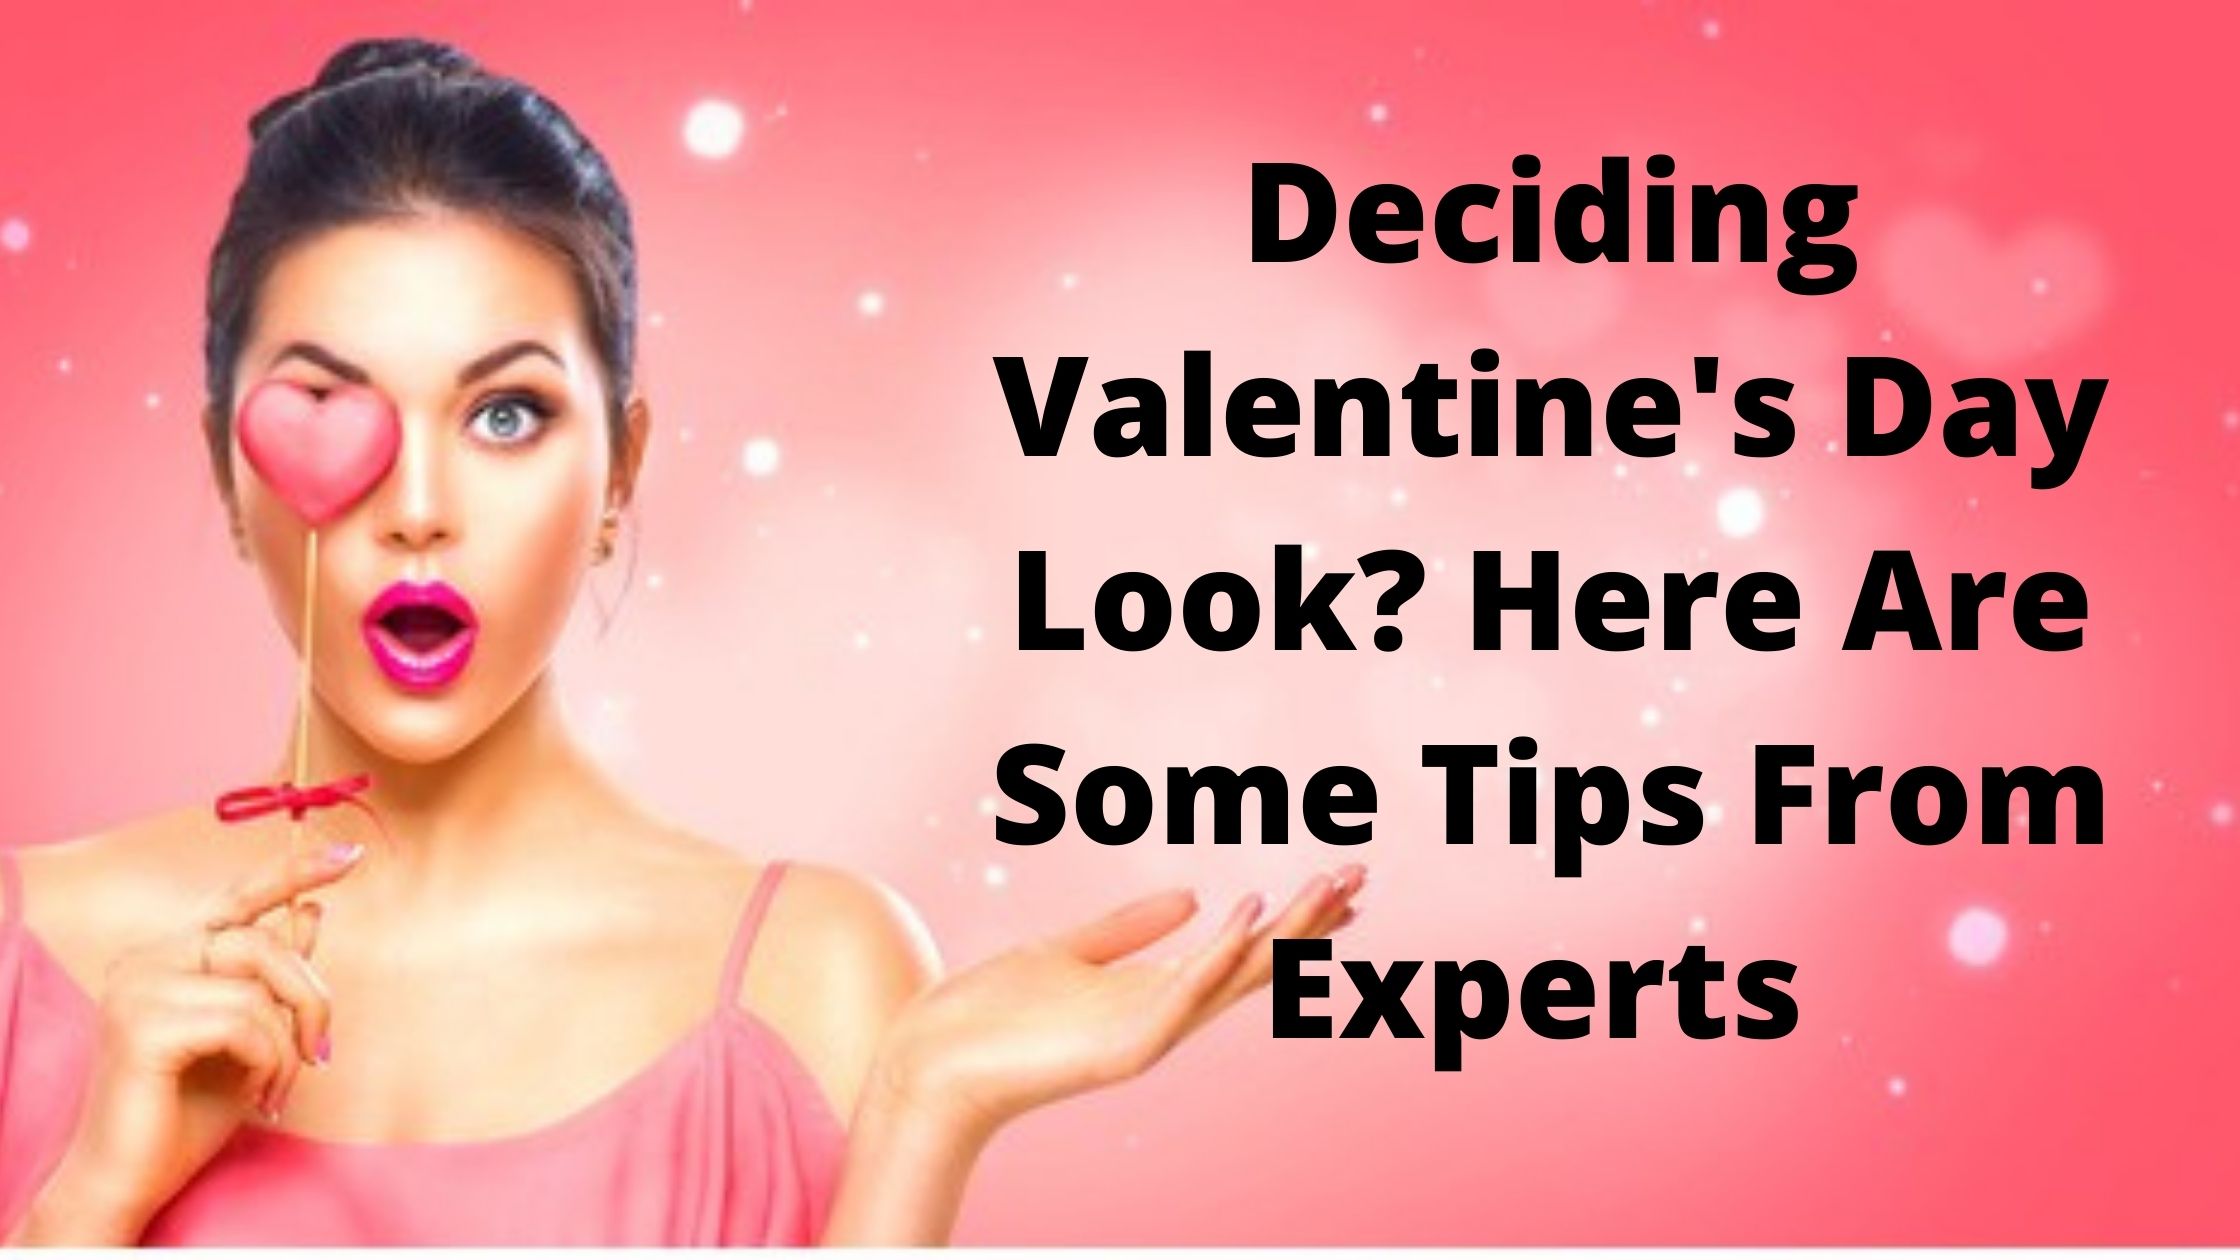 You are currently viewing Deciding Valentine’s Day Look? Here Are Some Tips From Experts